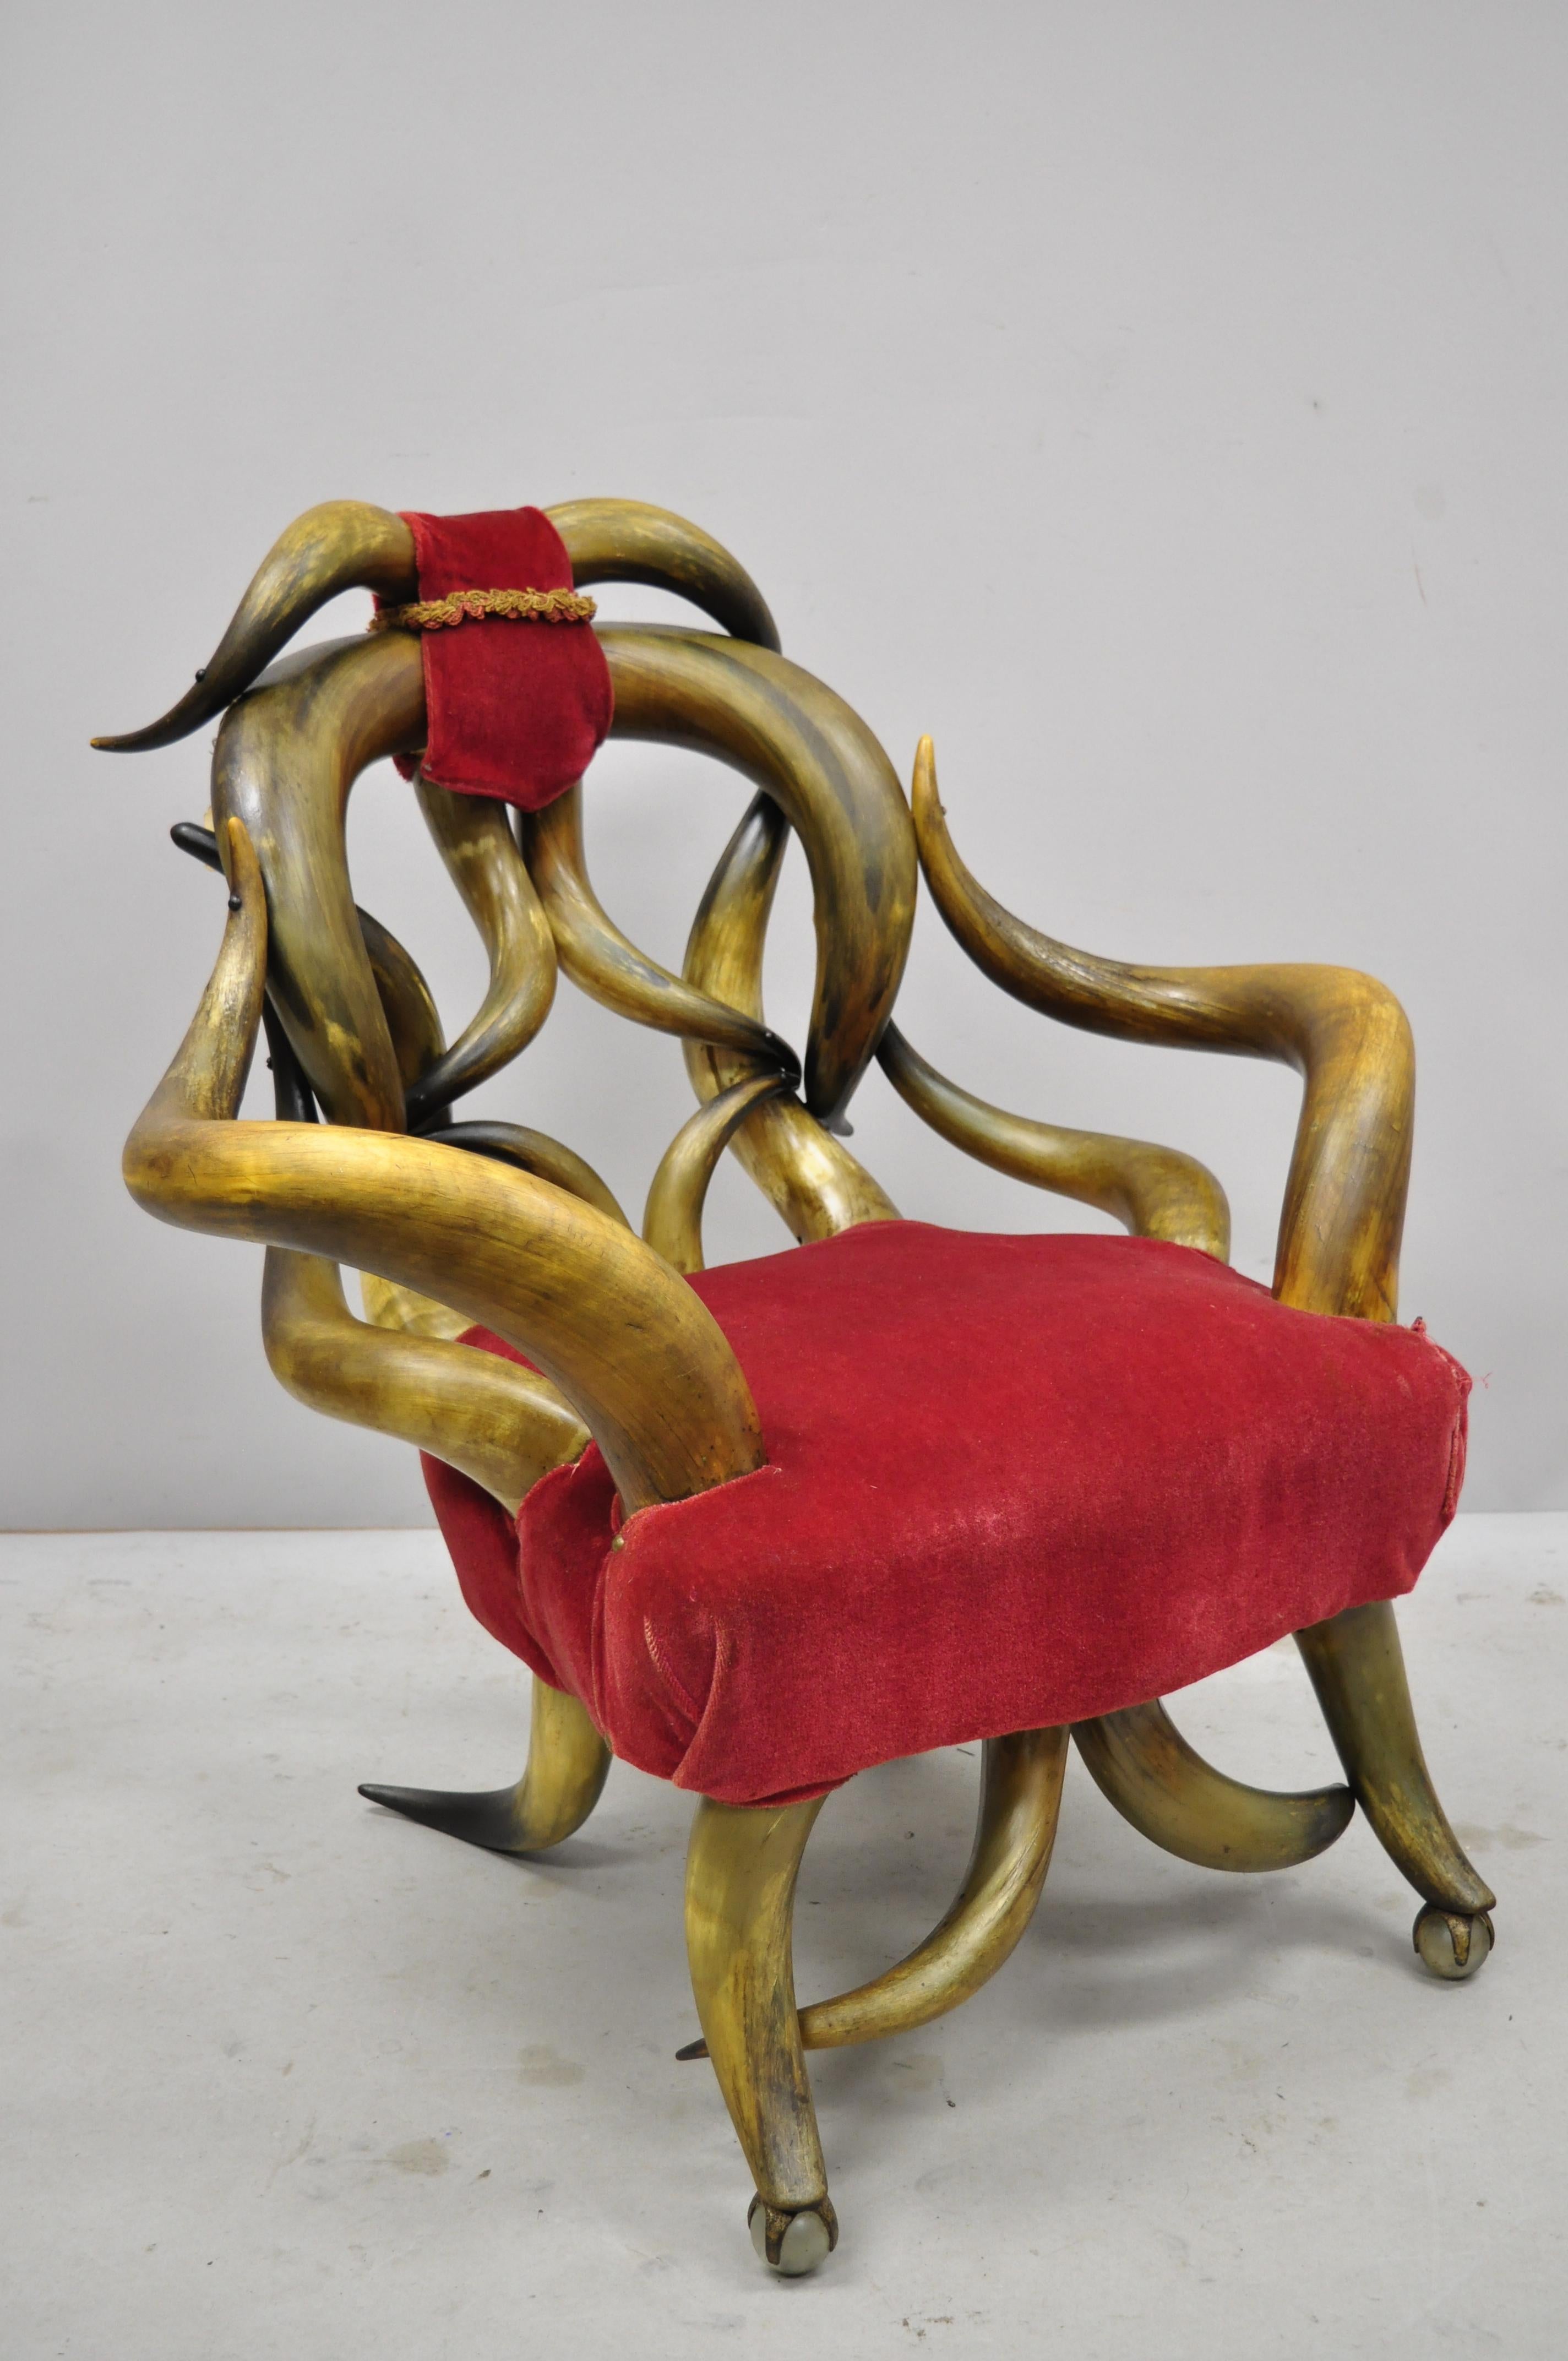 19th century Victorian antique steer horn parlor club lounge chair with glass ball feet. Item includes glass ball feet, mohair fabric, shapely steer horn frame, very nice antique item, great style and form, circa late 19th century. Measurements: